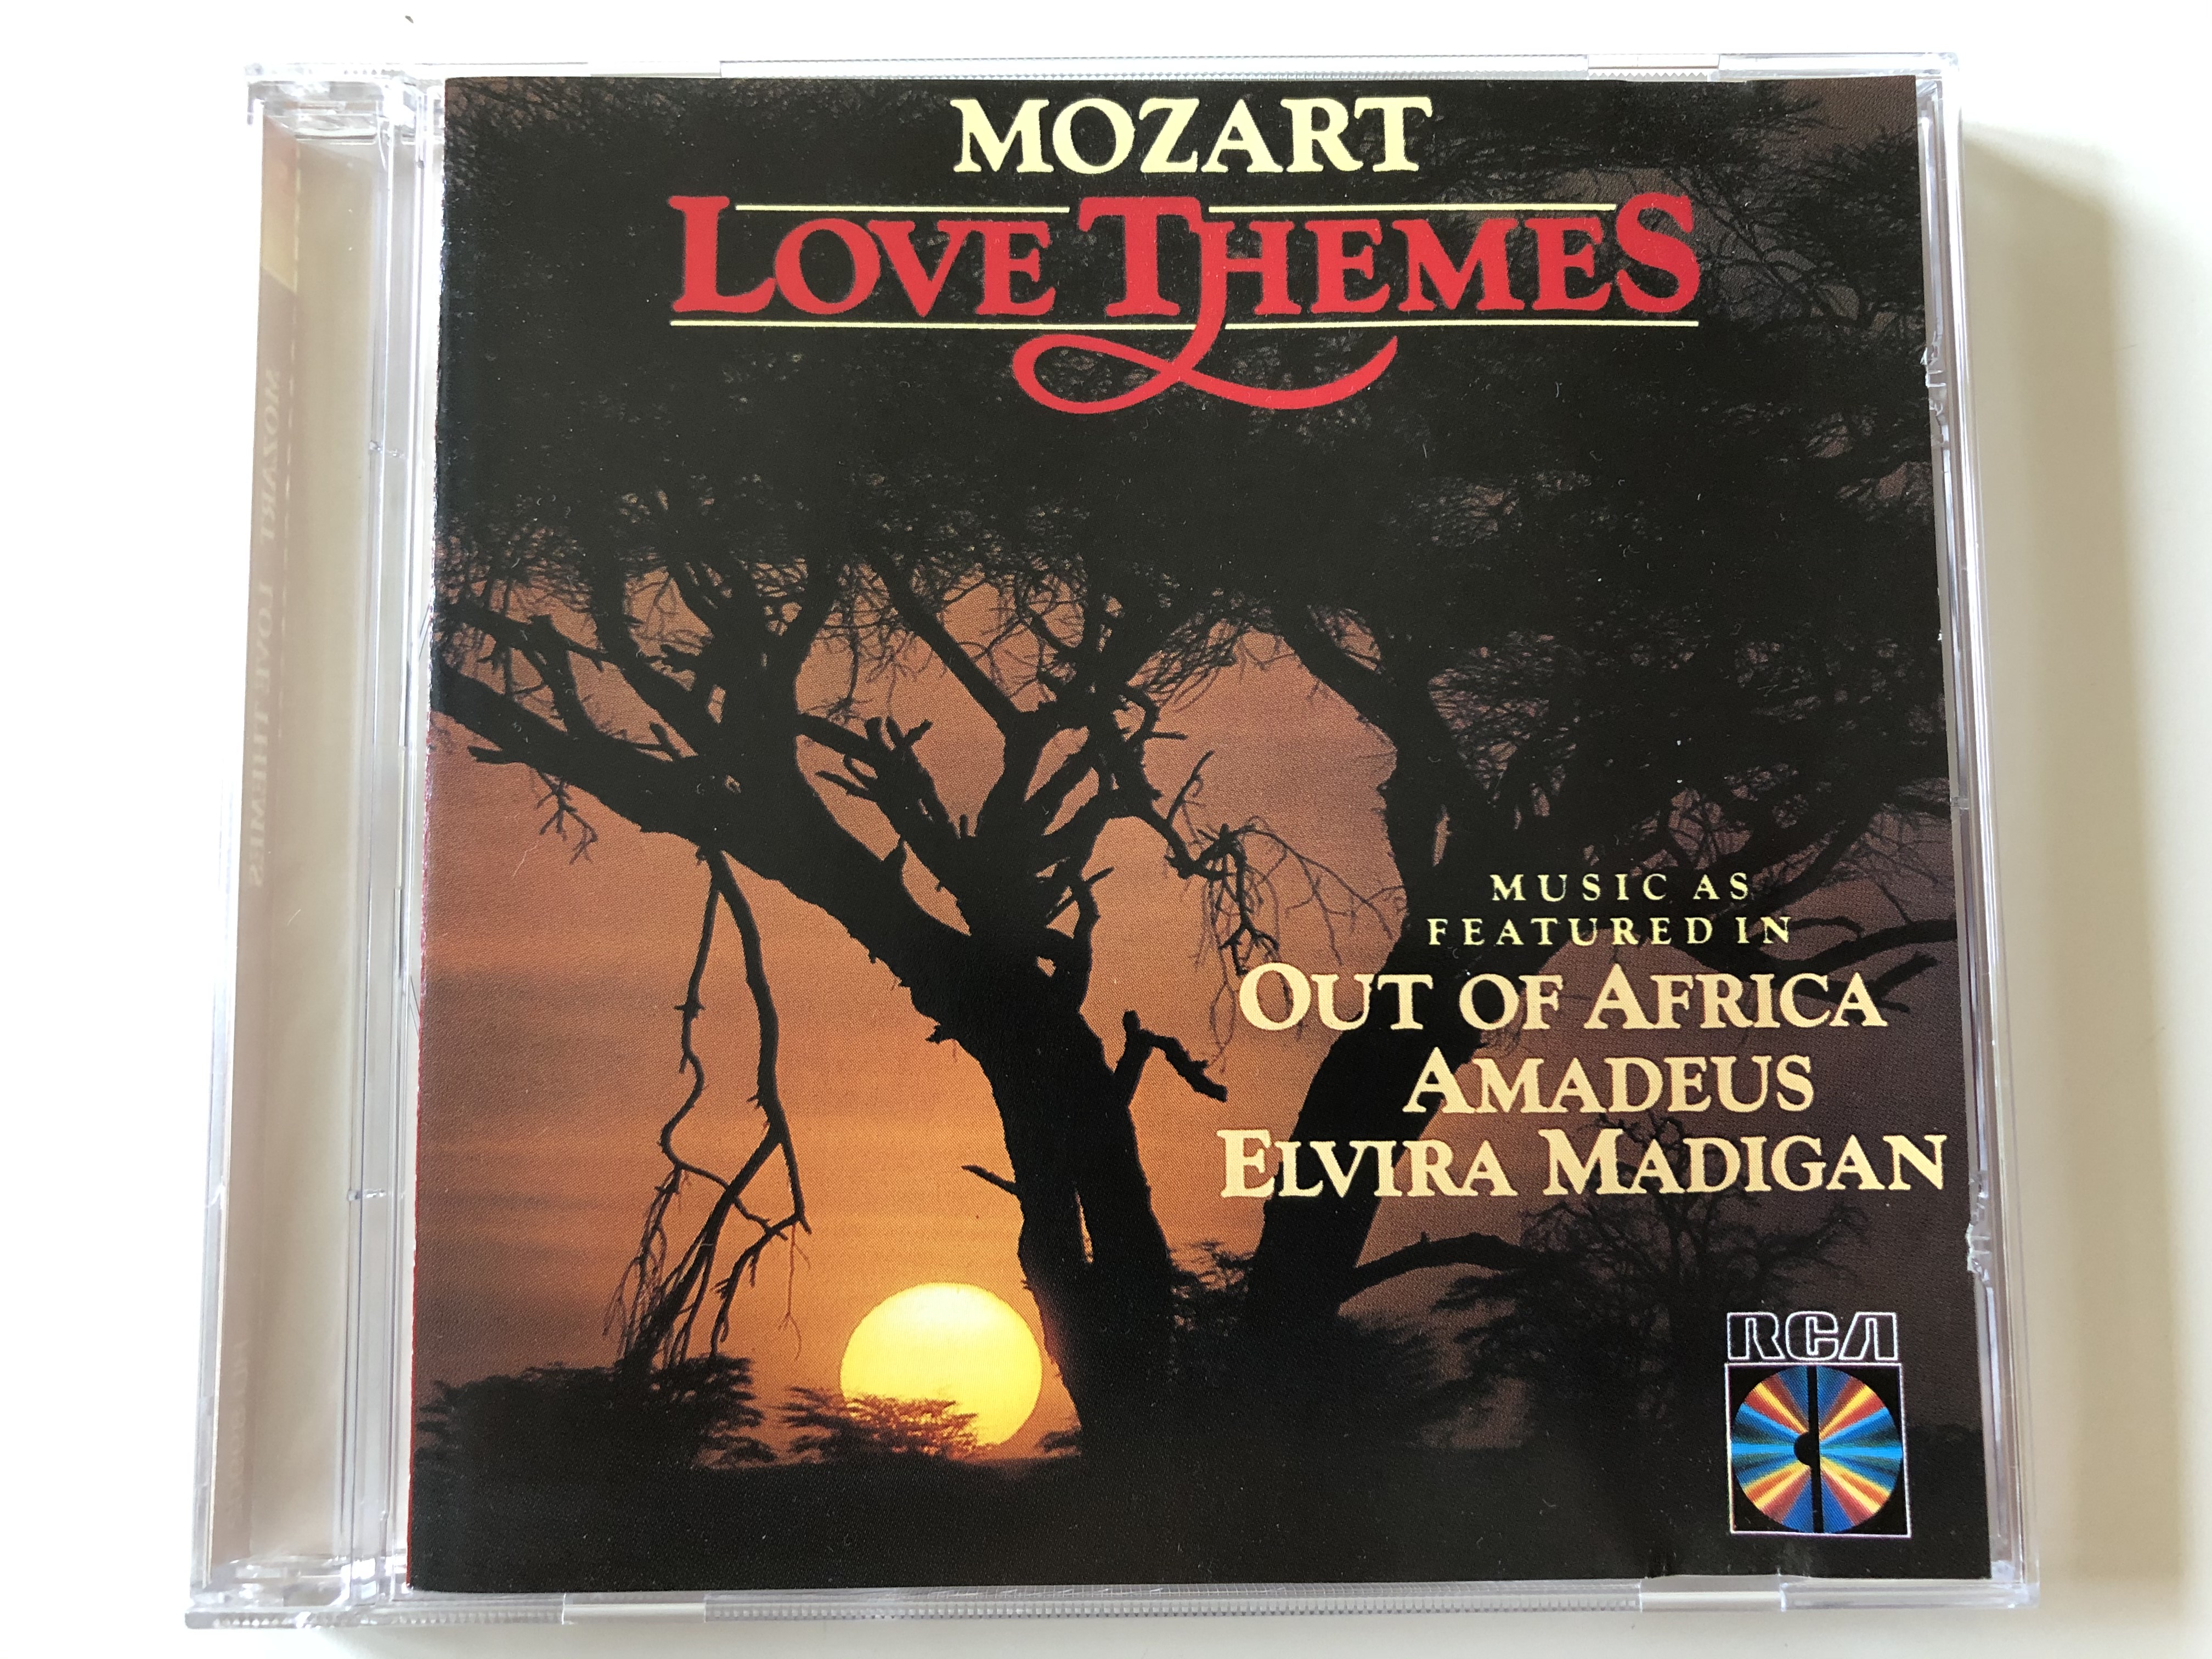 mozart-love-themes-music-as-featured-in-out-of-africa-amadeus-elvira-madigan-rca-red-seal-audio-cd-rd-89902-1-.jpg